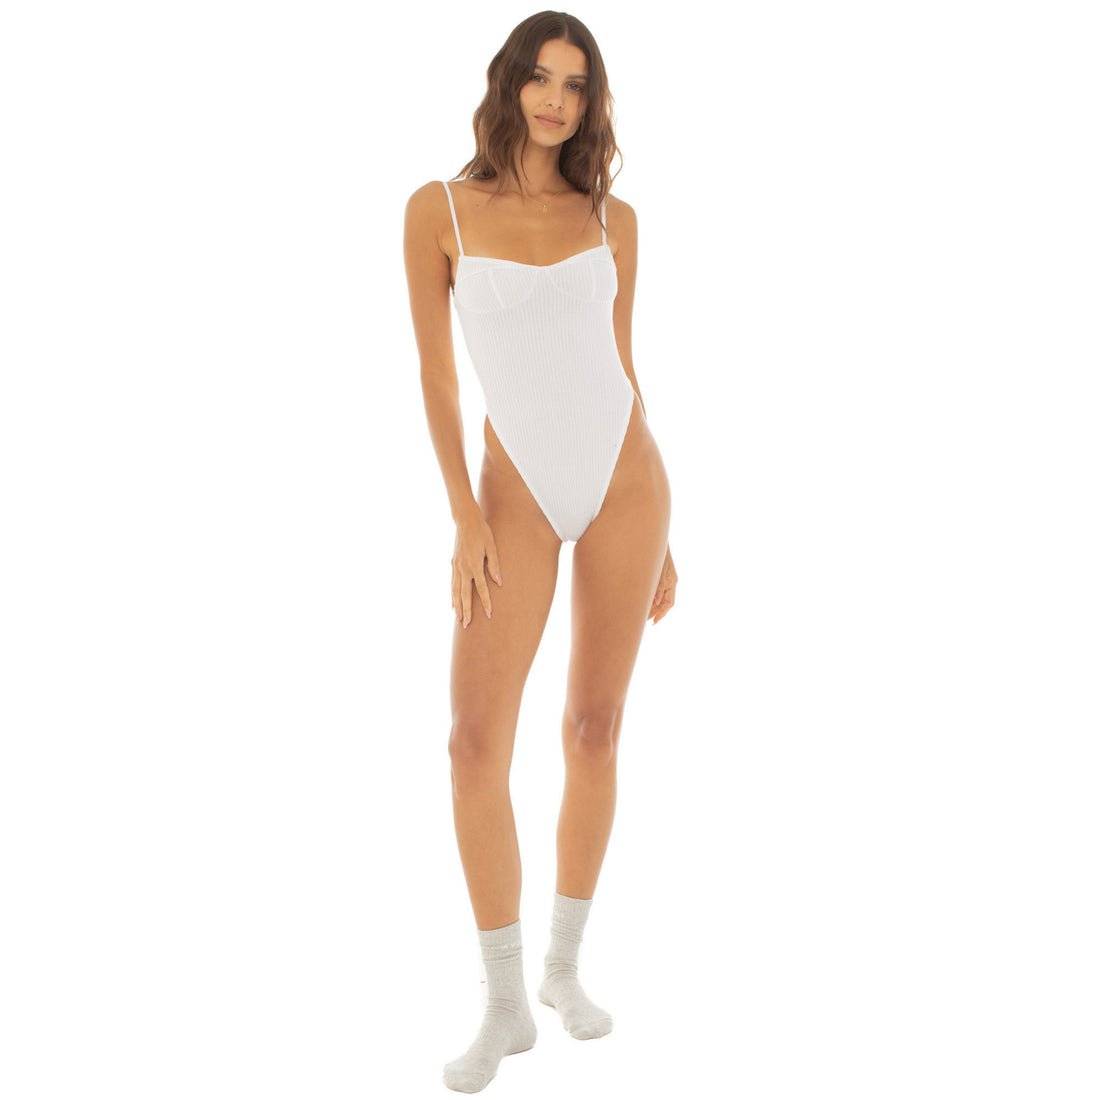 Are You Am I - Kaat Bodysuit **white